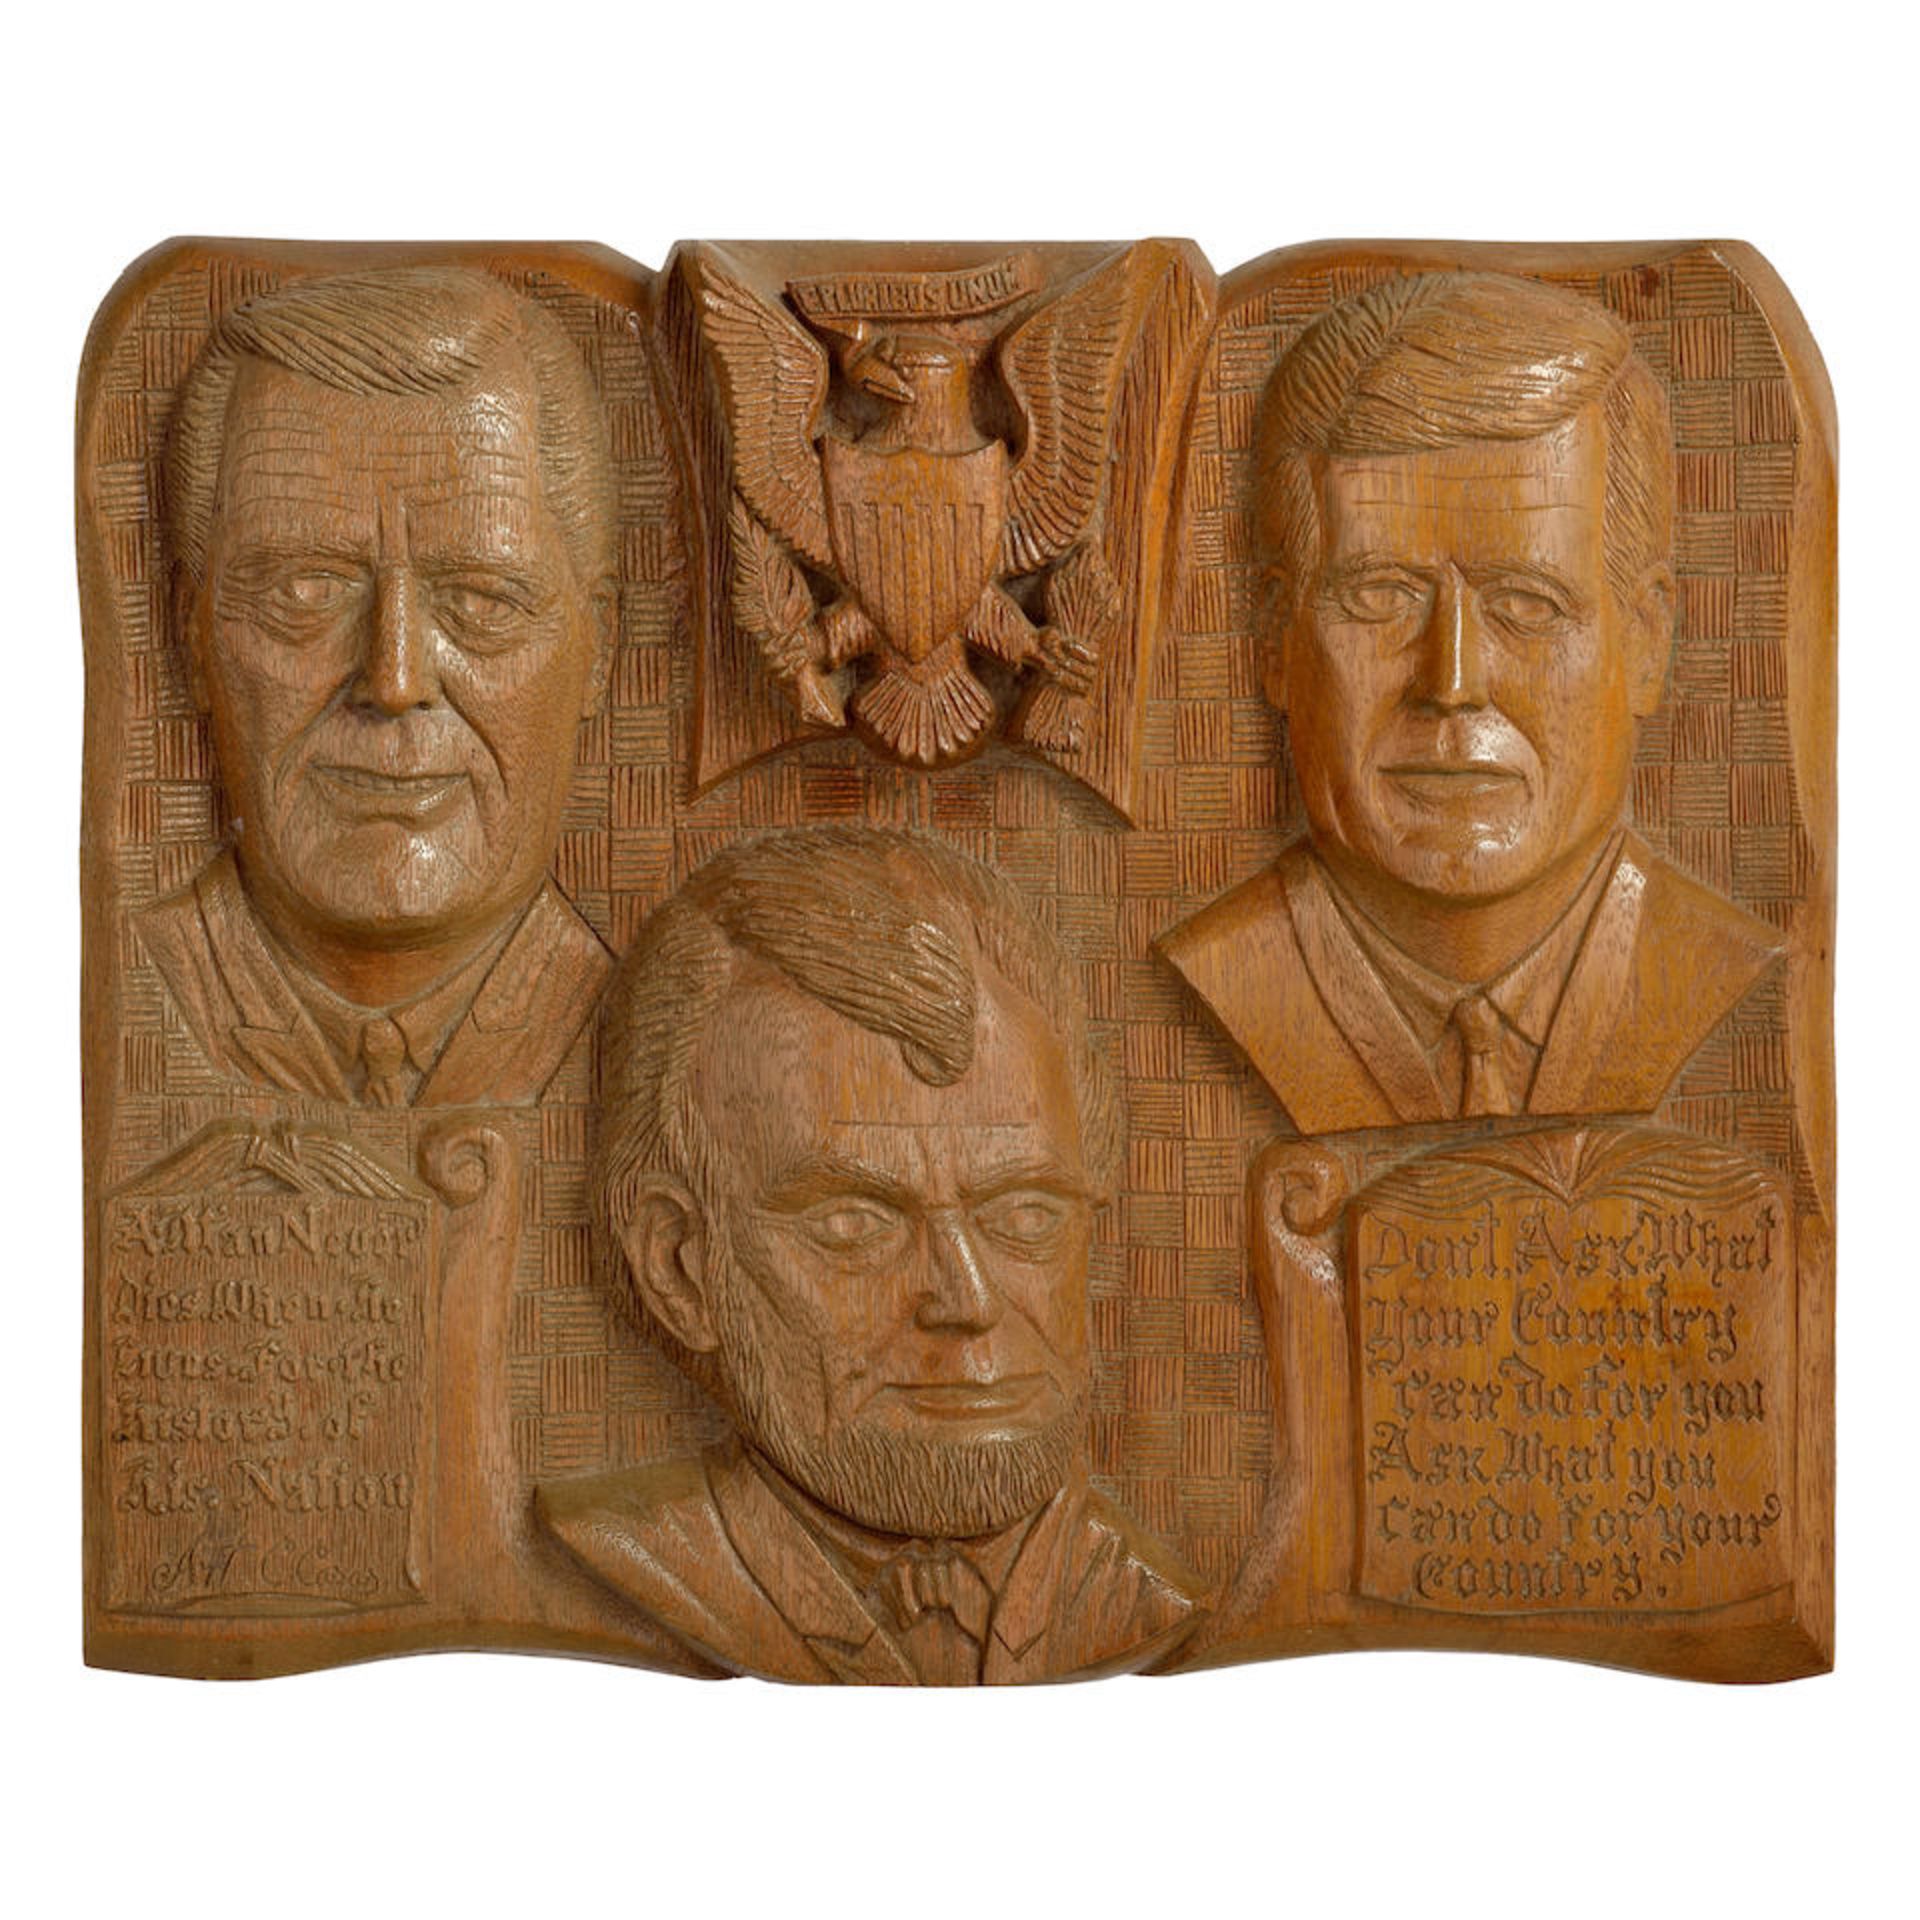 Relief Carving of Roosevelt, Lincoln, and Kennedy, Art C. Casas, United States, c. 1970.